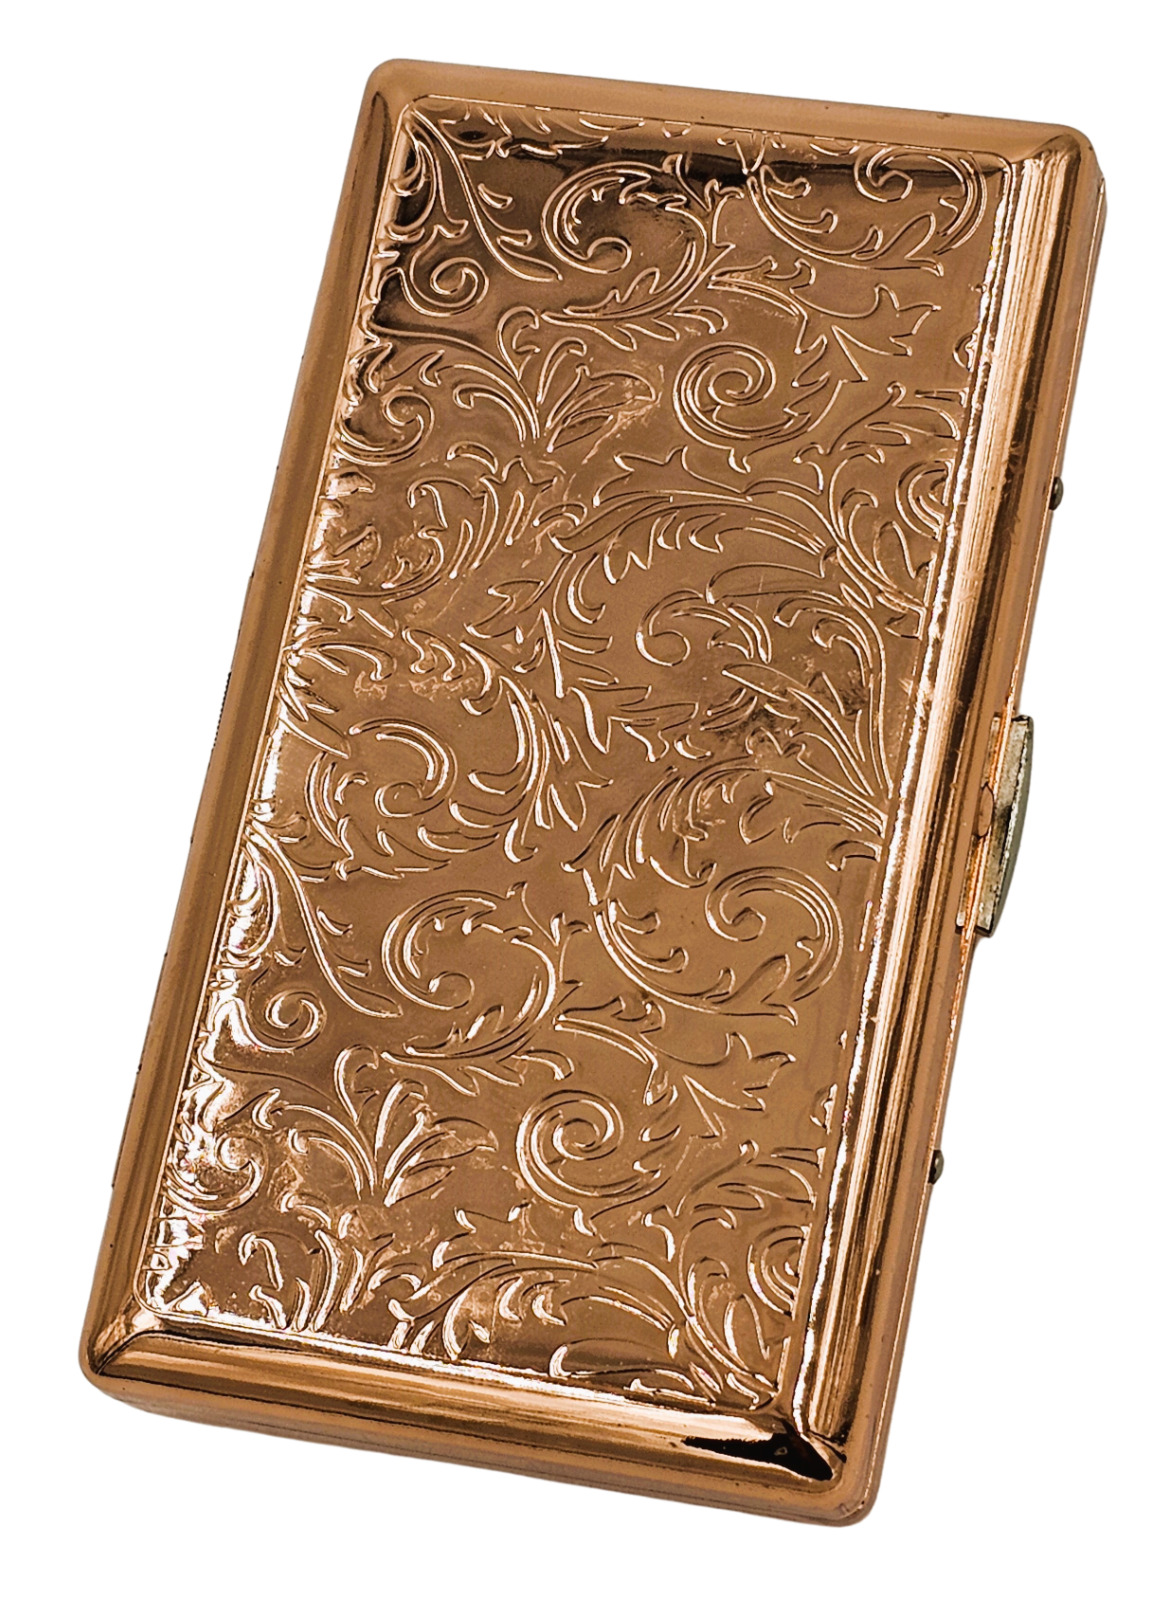 Retro Cigarette Case Double Sided King & 100s Boteh Rose Gold Color 4x2inch